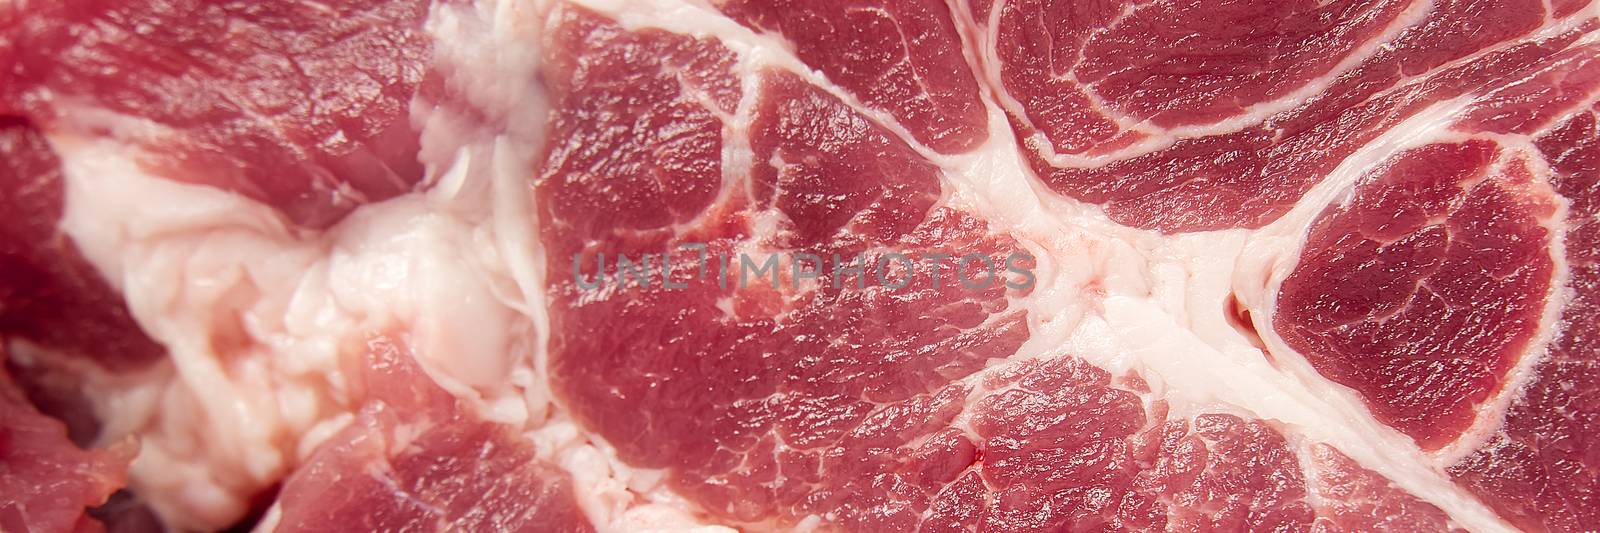 fresh raw pork meat texture, can be used as background